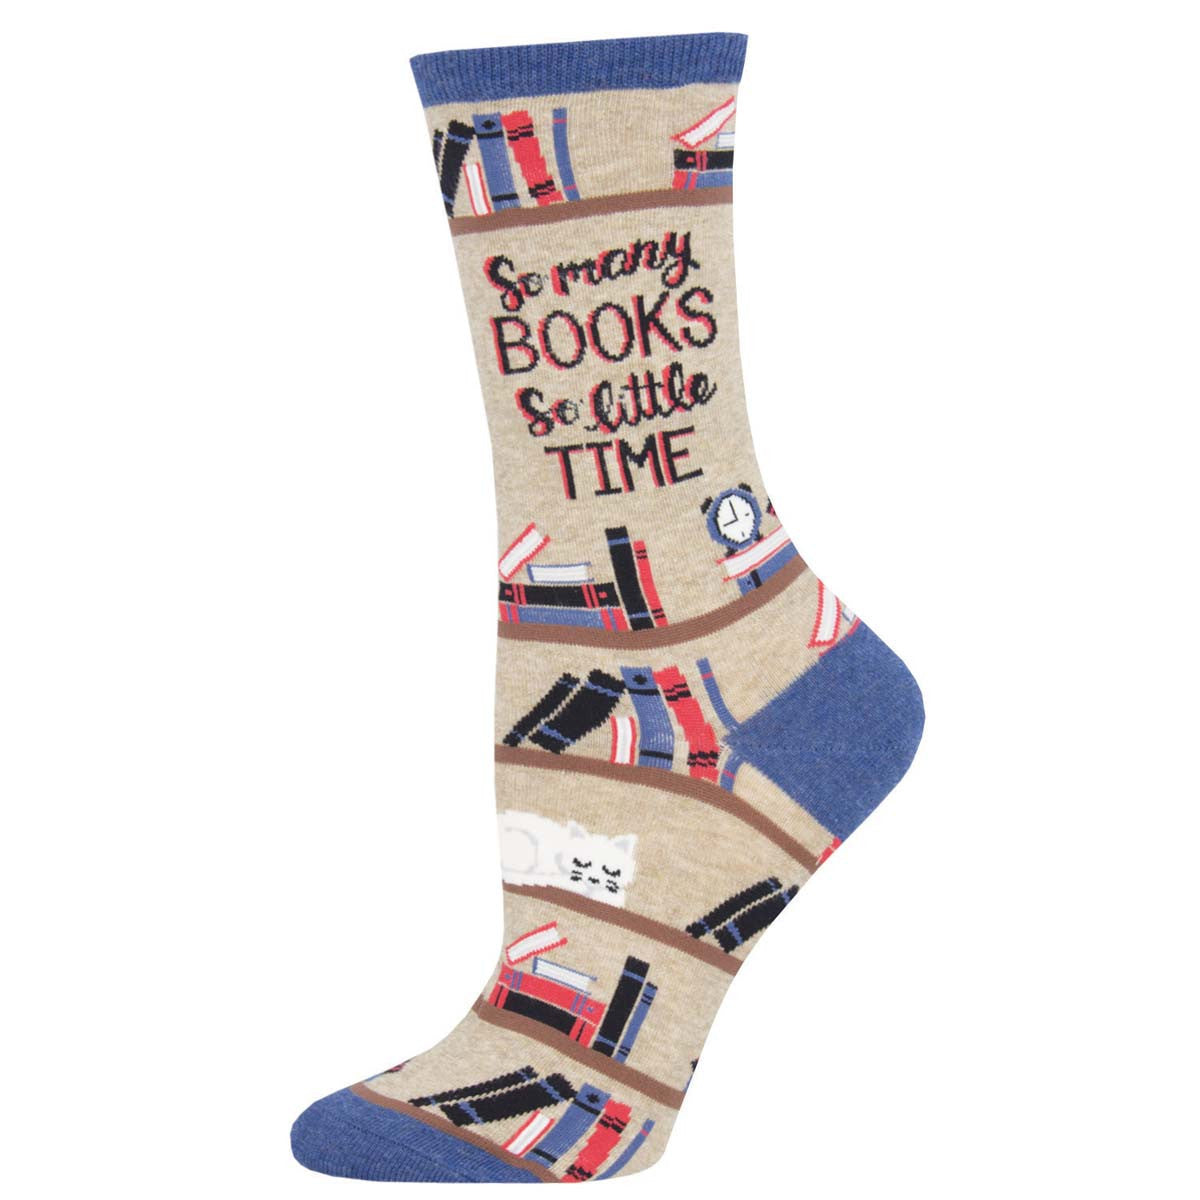 Time For a Good Book Socks